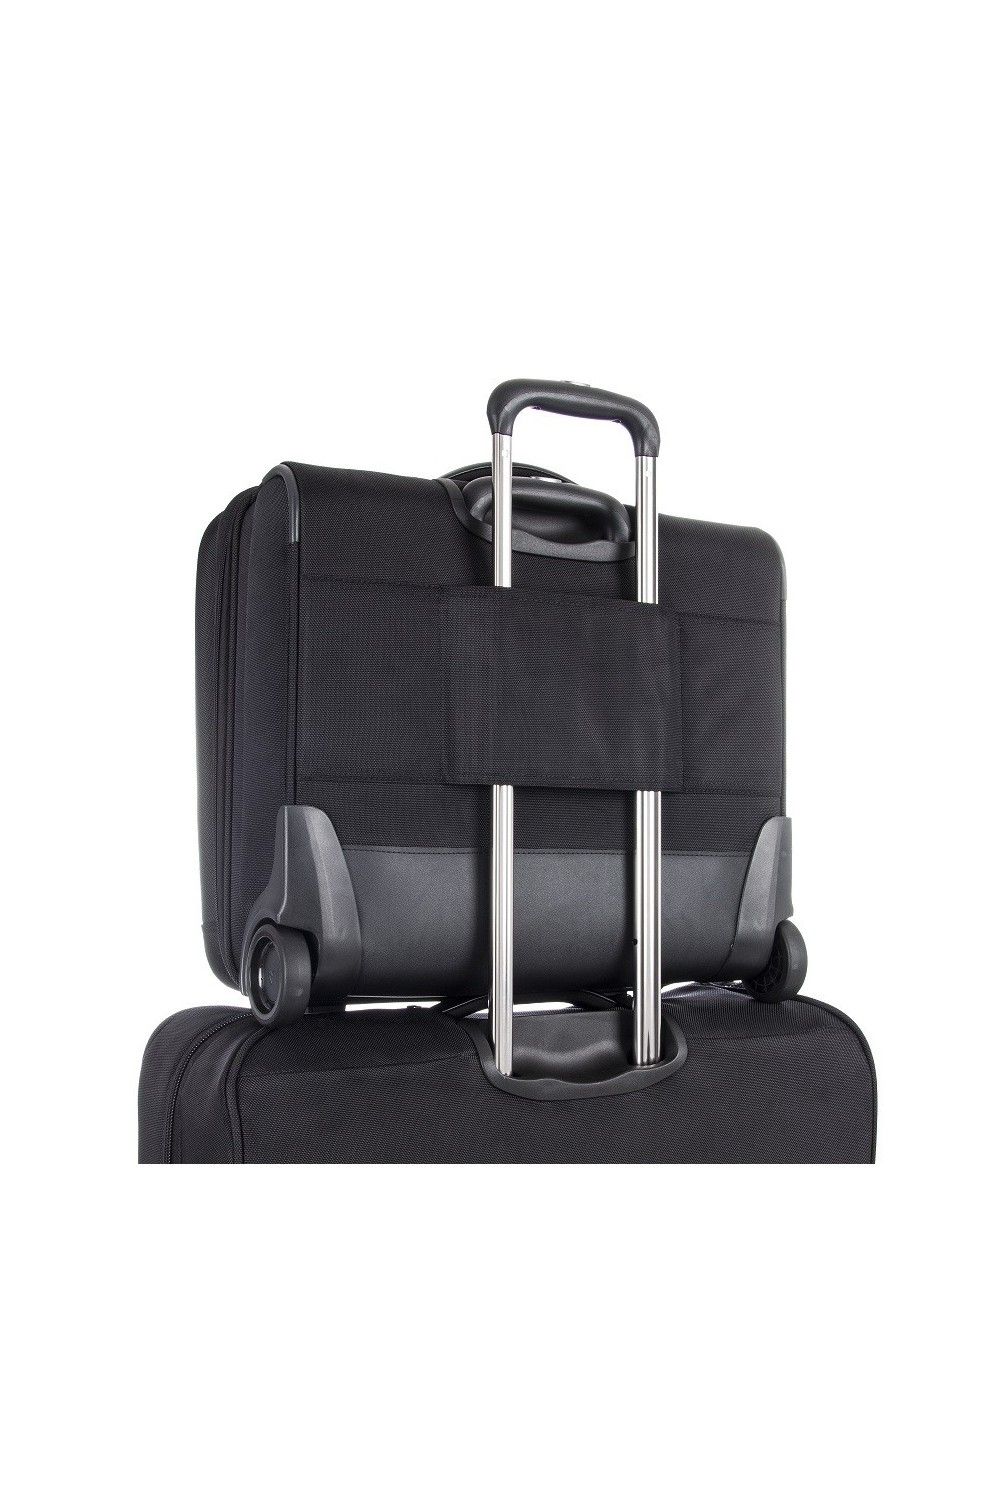 Roncato business trolley 17 inch 1 compartment 2 wheels